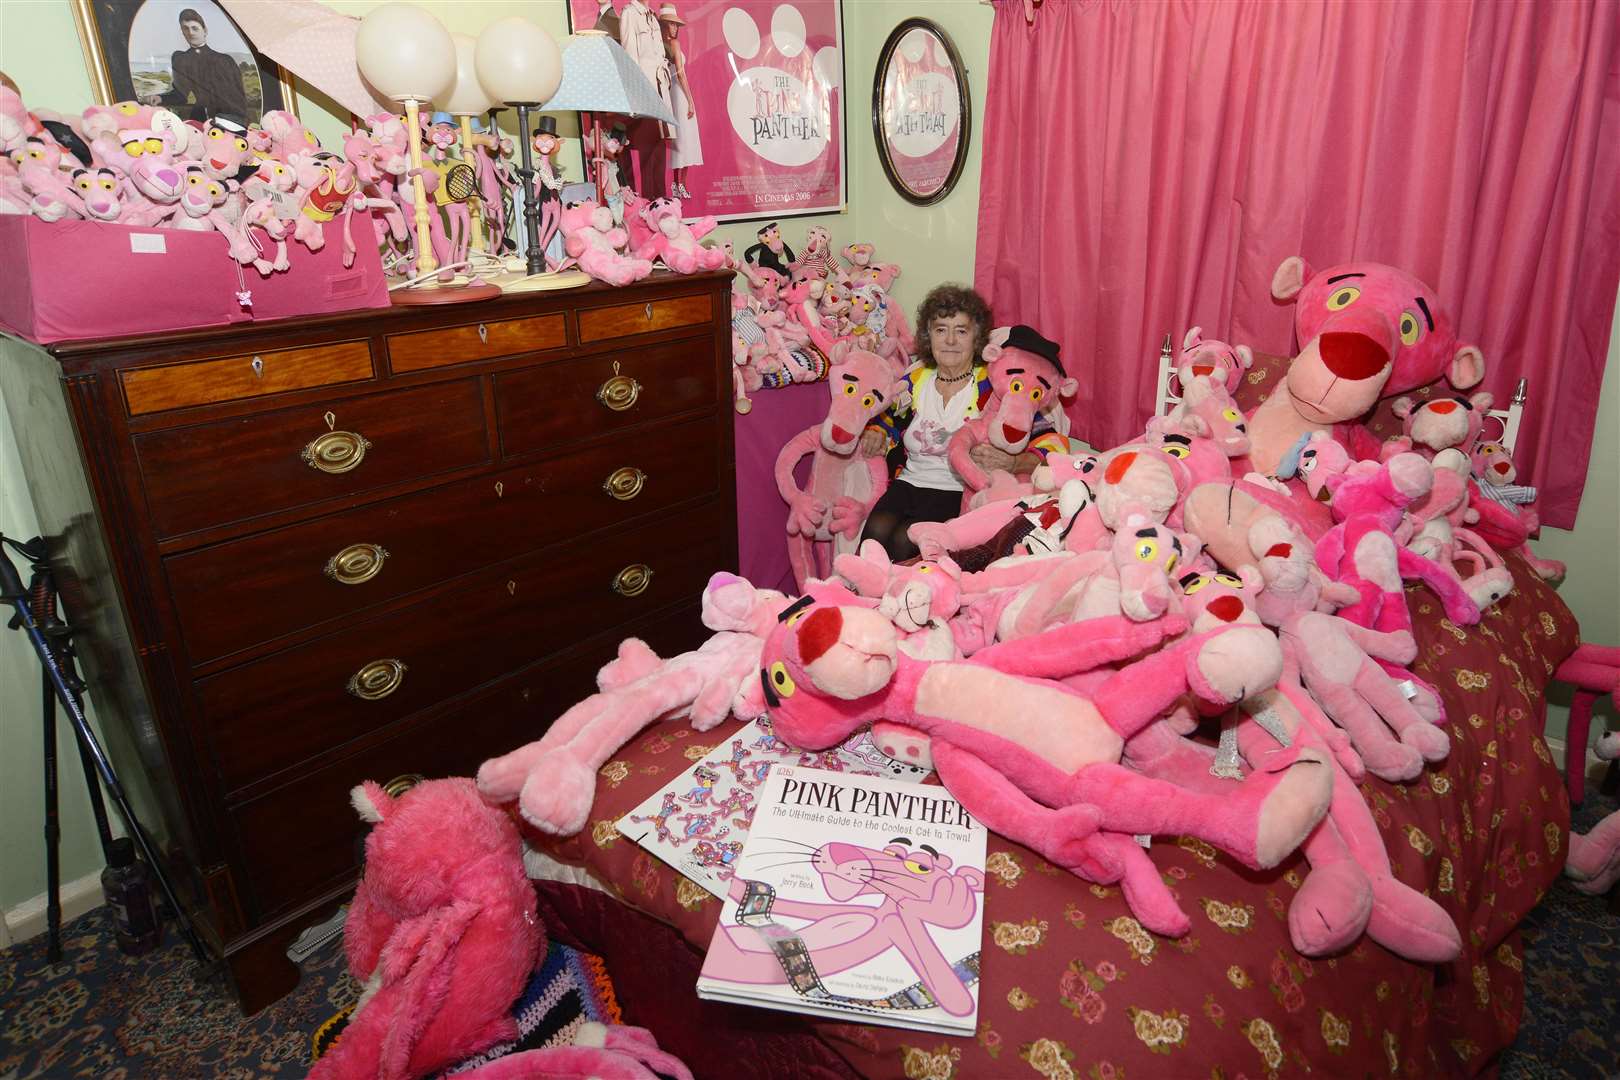 June Amos' home has been taken over by Pink Panthers. Picture: Paul Amos